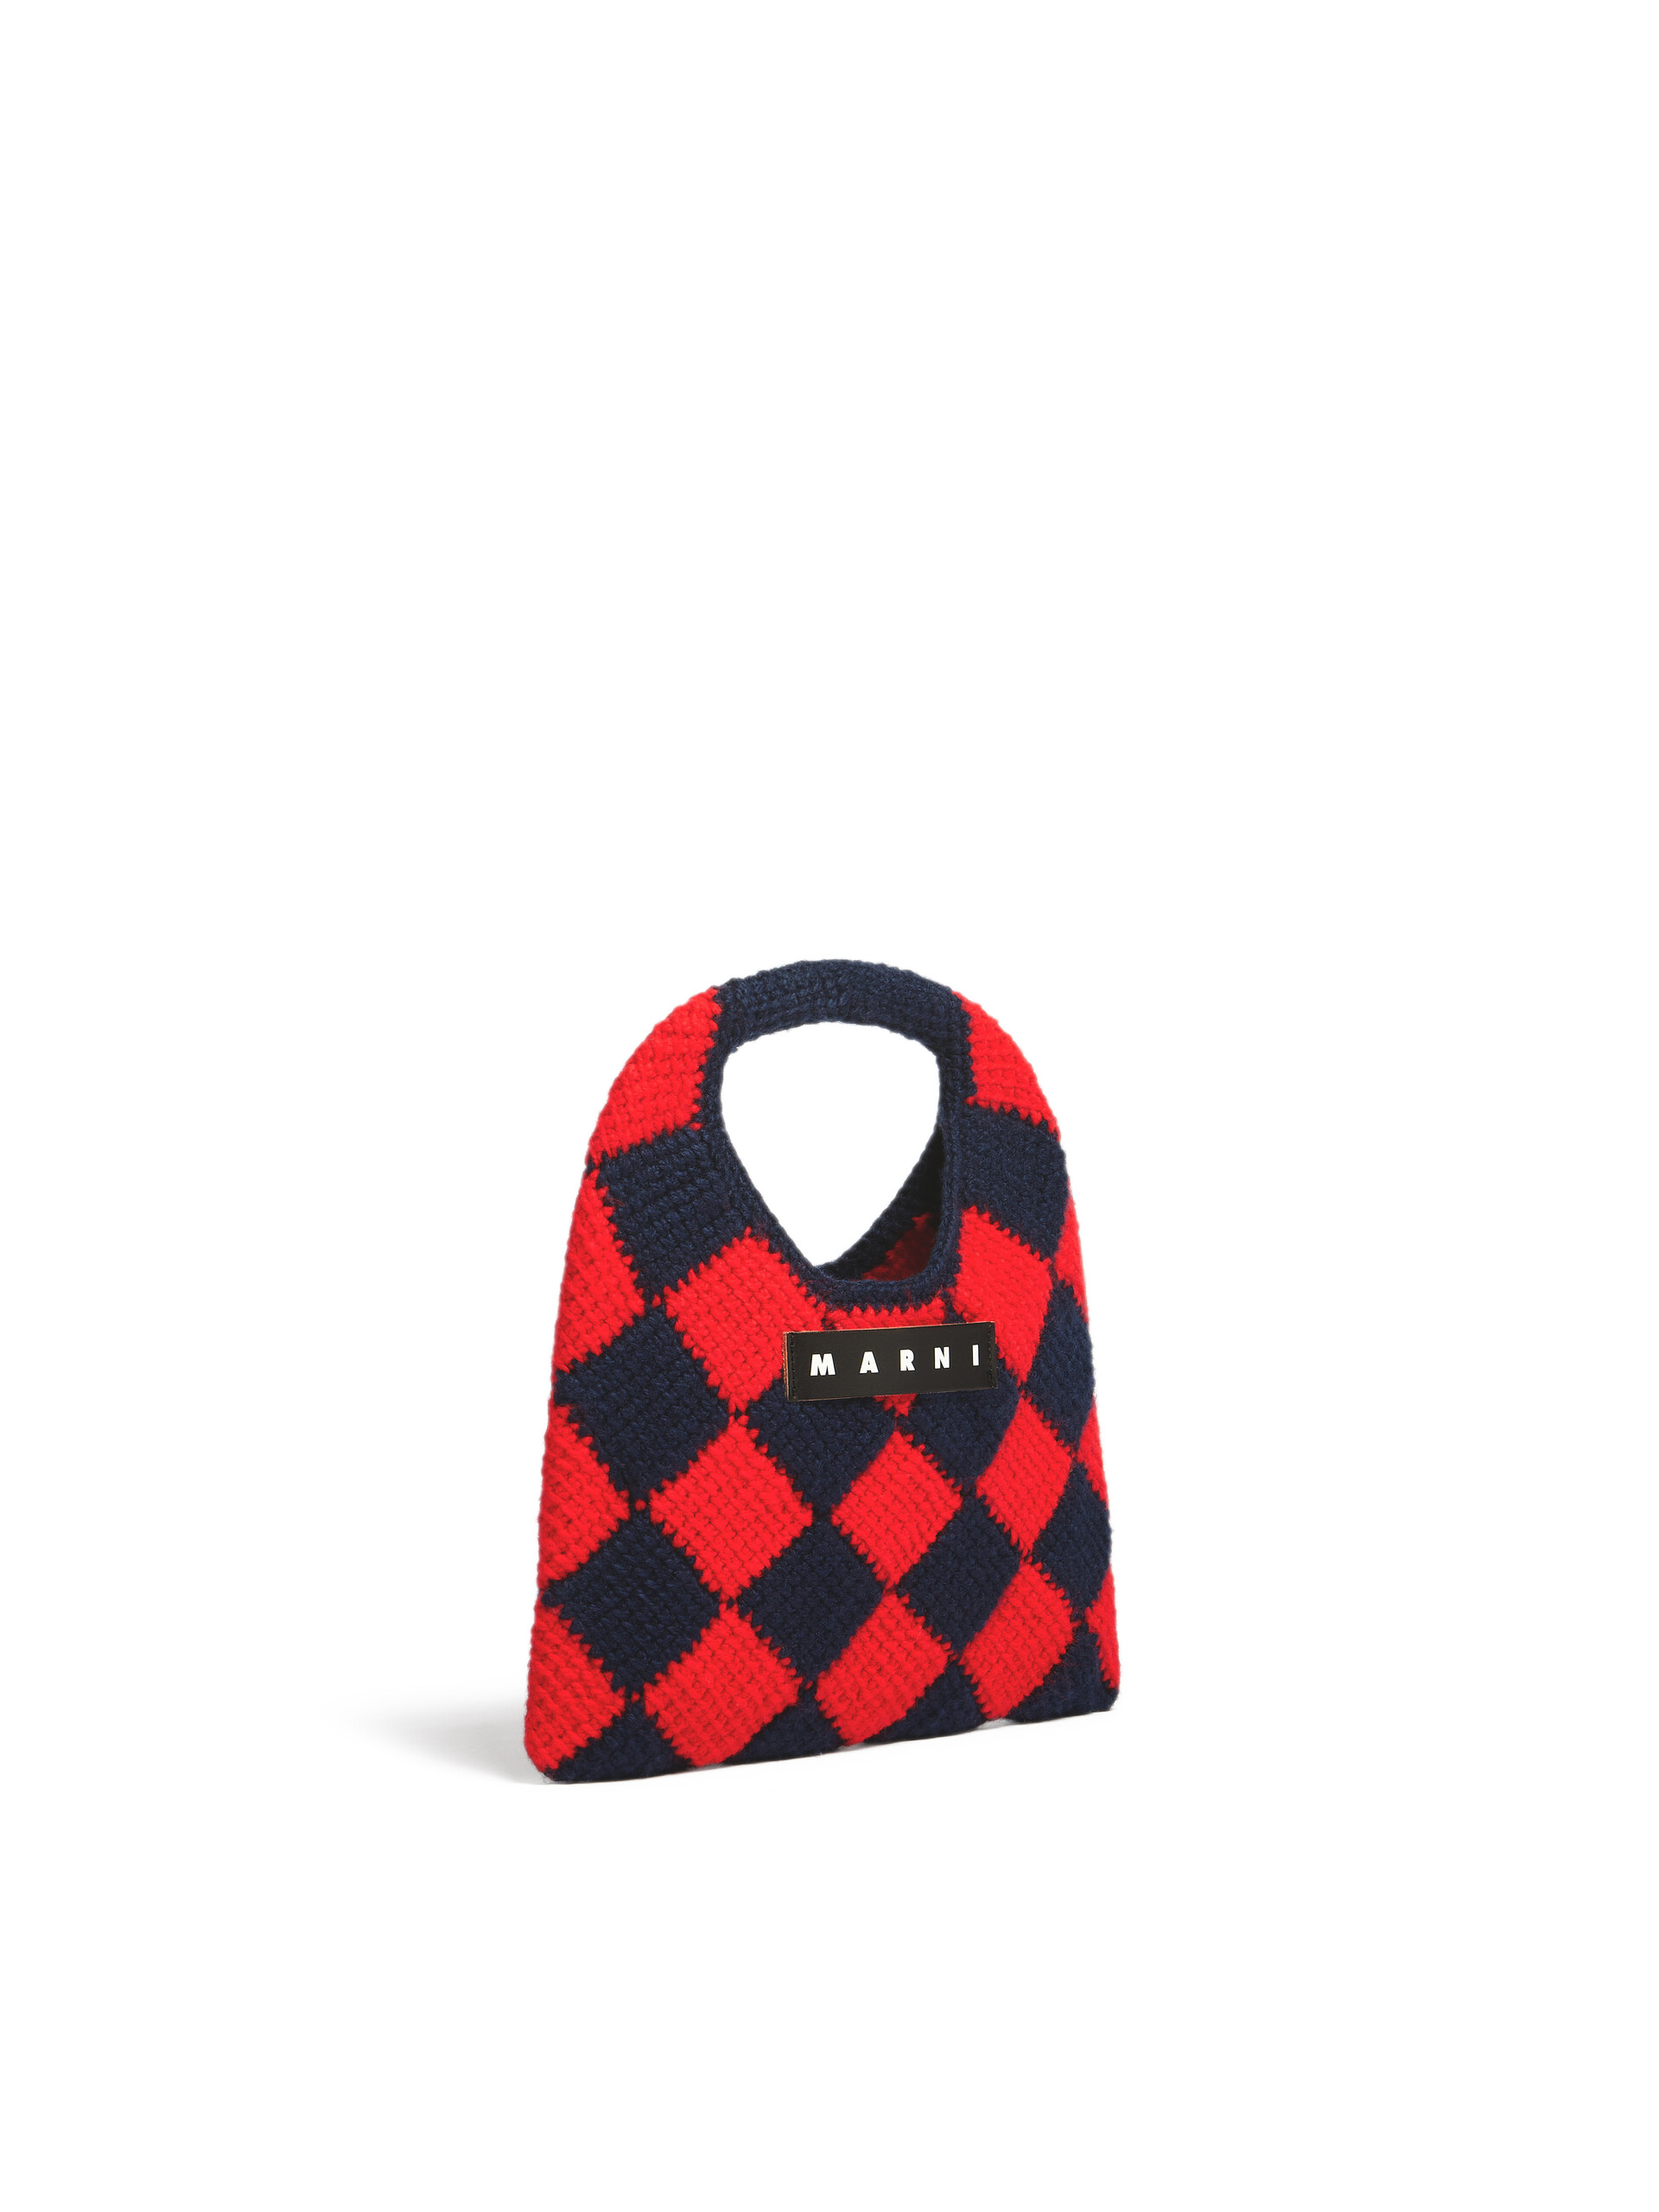 MARNI MARKET DIAMOND small bag in blue and red tech wool - Shopping Bags - Image 2